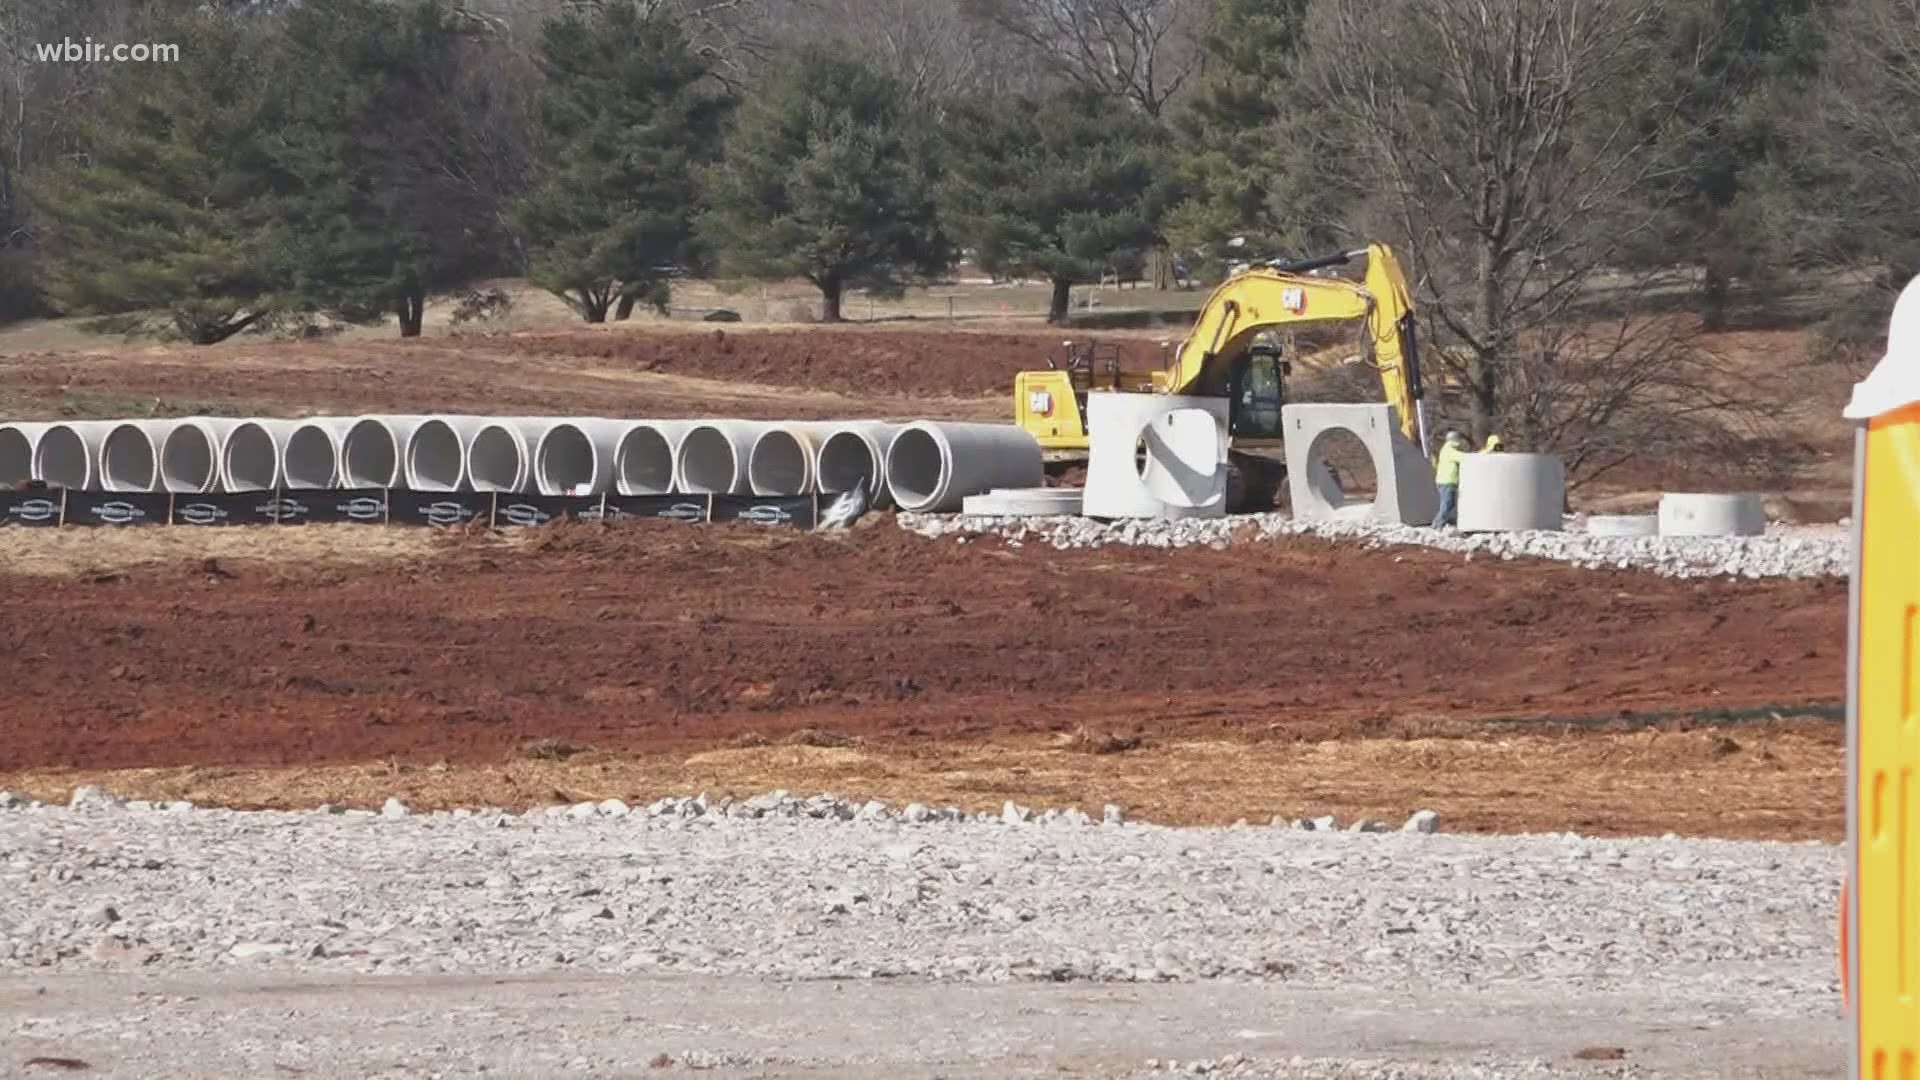 Site works is underway for a giant new distribution center in Alcoa. Records indicate it'll be for Amazon.